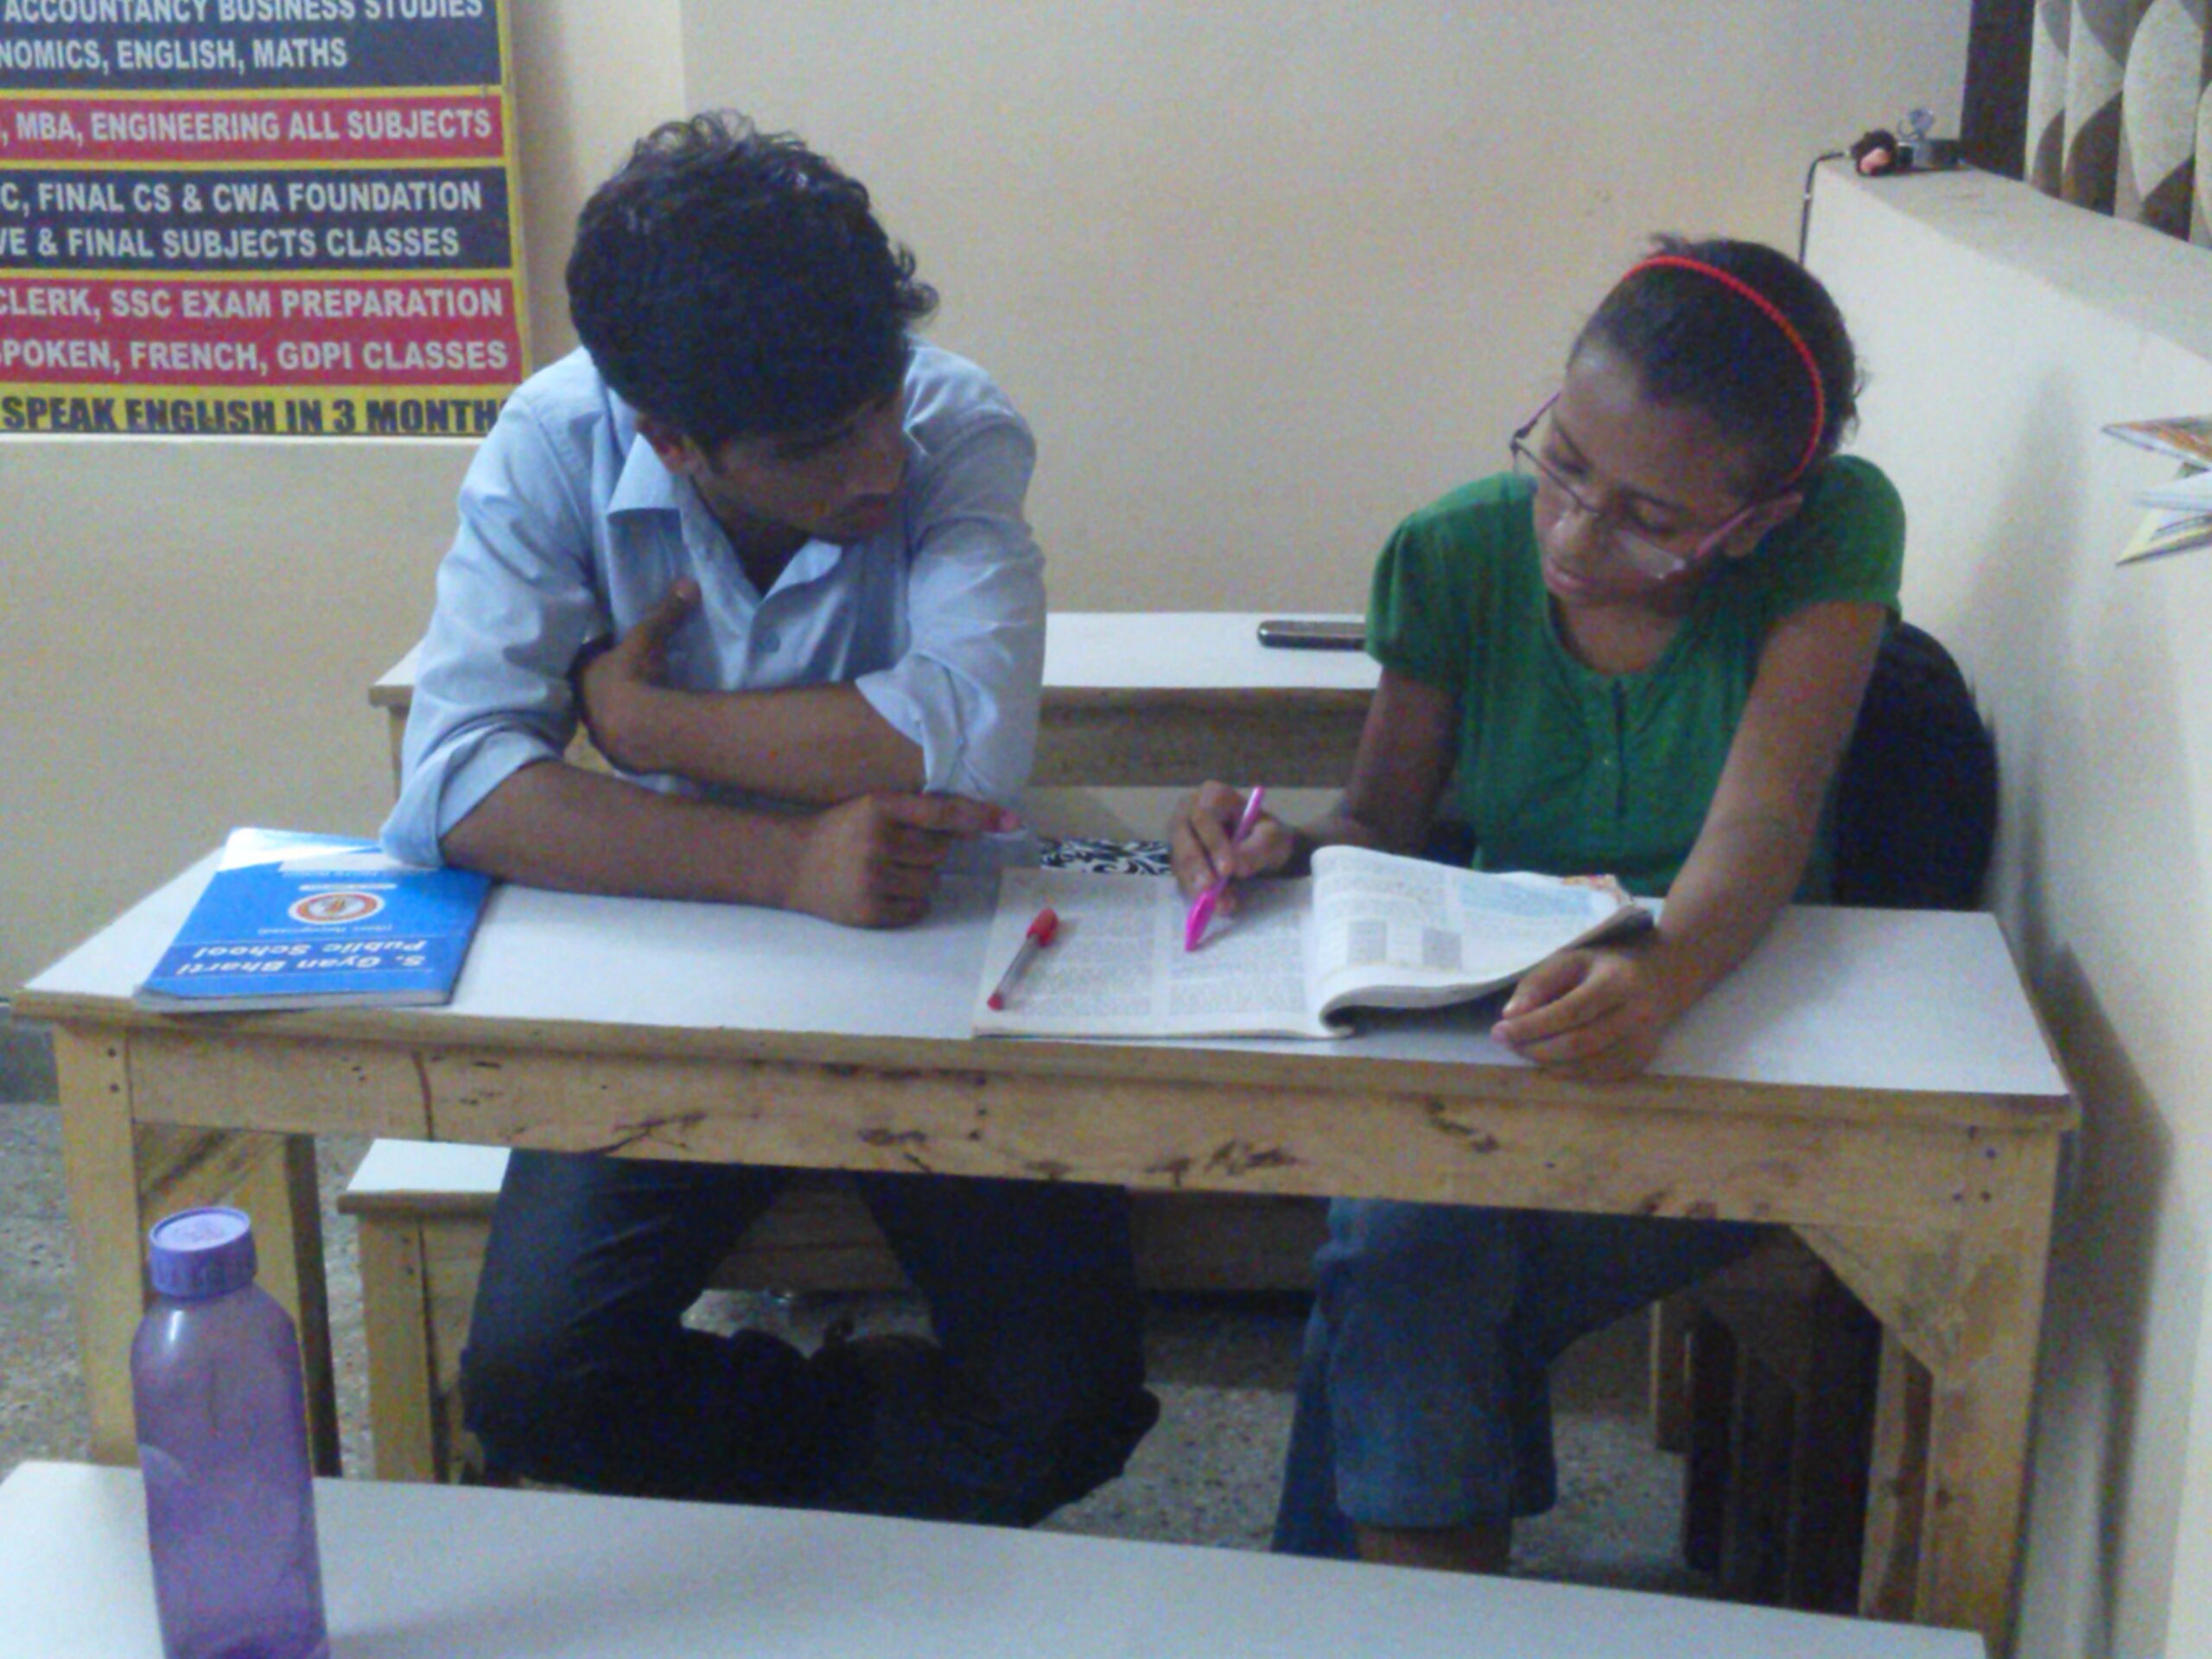 XI XII BBA & MBA All Subjects Home Tuition Best In Noida Home tuition OF xi xii BBA B.COM CA MBA ALL SUBJECTS commerce, accounts finance economics management income tax home tuition in Noida Financial Accounting Income Tax Cost & Management Accounting Investment Management Security Analysis & Portfolio Management Economics Financial Management Economics Operation Research Statistics, Accounting